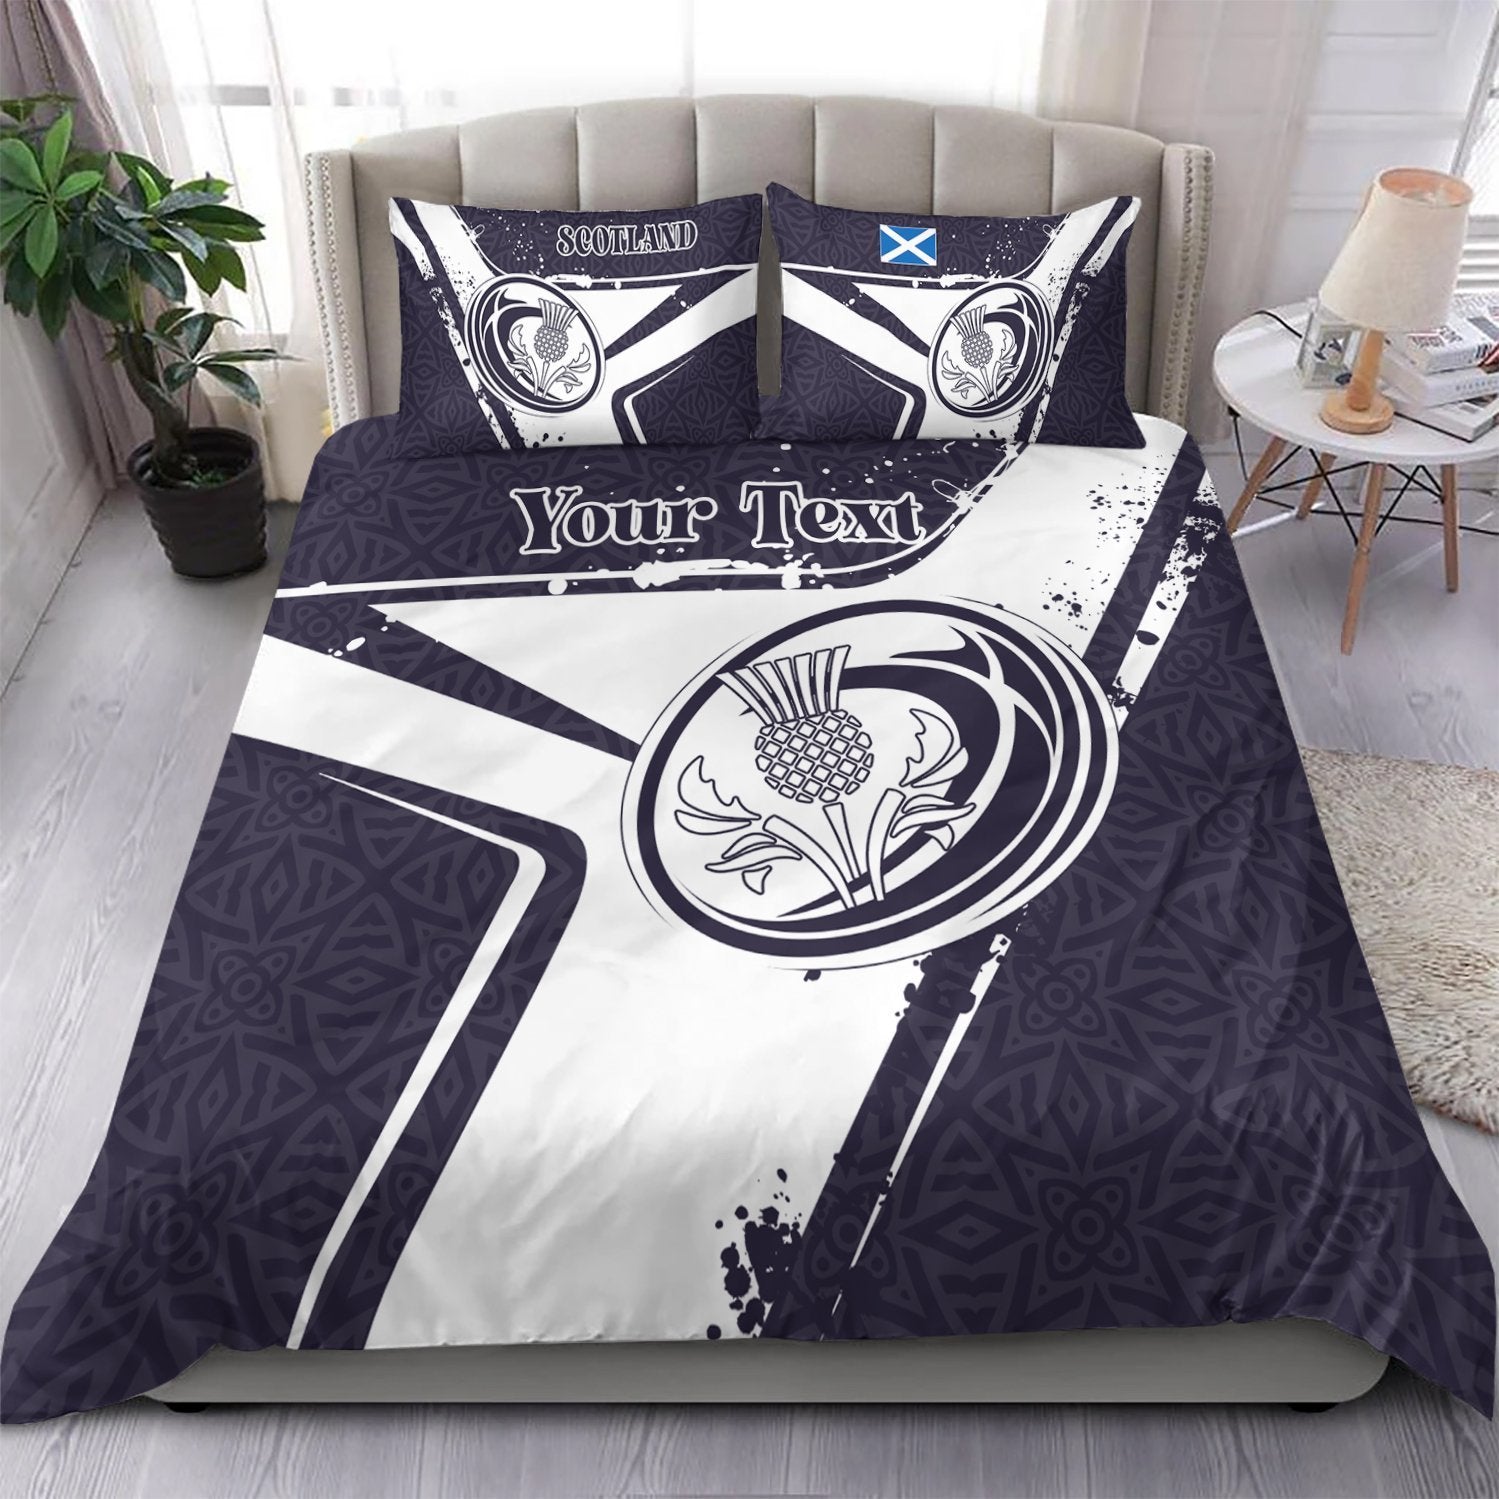 custom-text-scotland-rugby-personalised-bedding-set-scottish-rugby